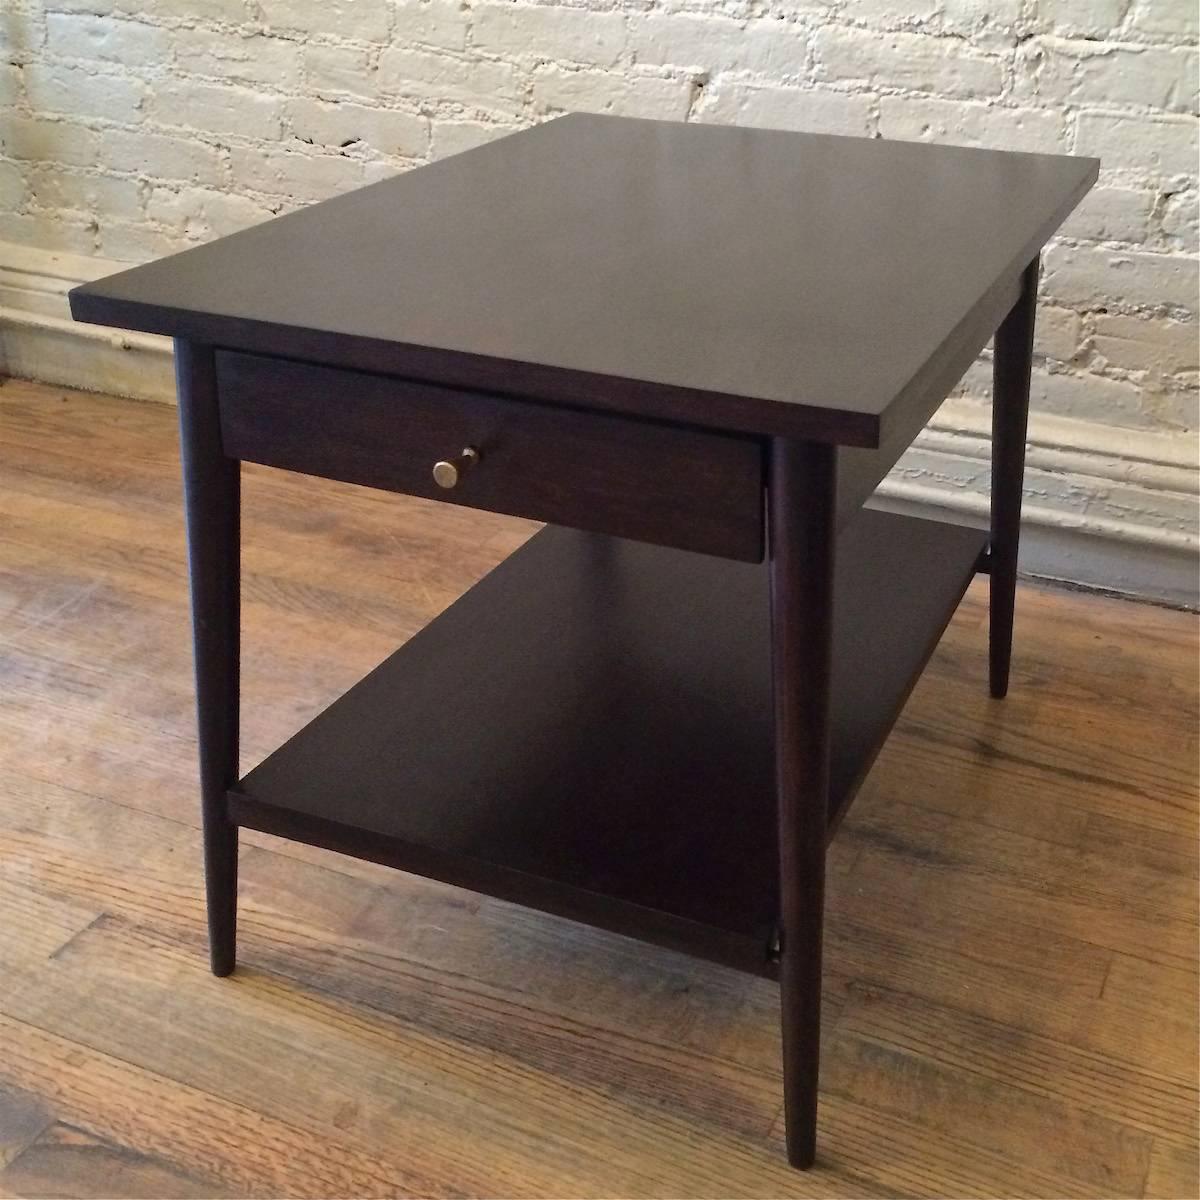 End table with drawer by Paul McCobb for Planner Group, manufactured by Winchendon, with signature hourglass brass pull in an ebonized finish.